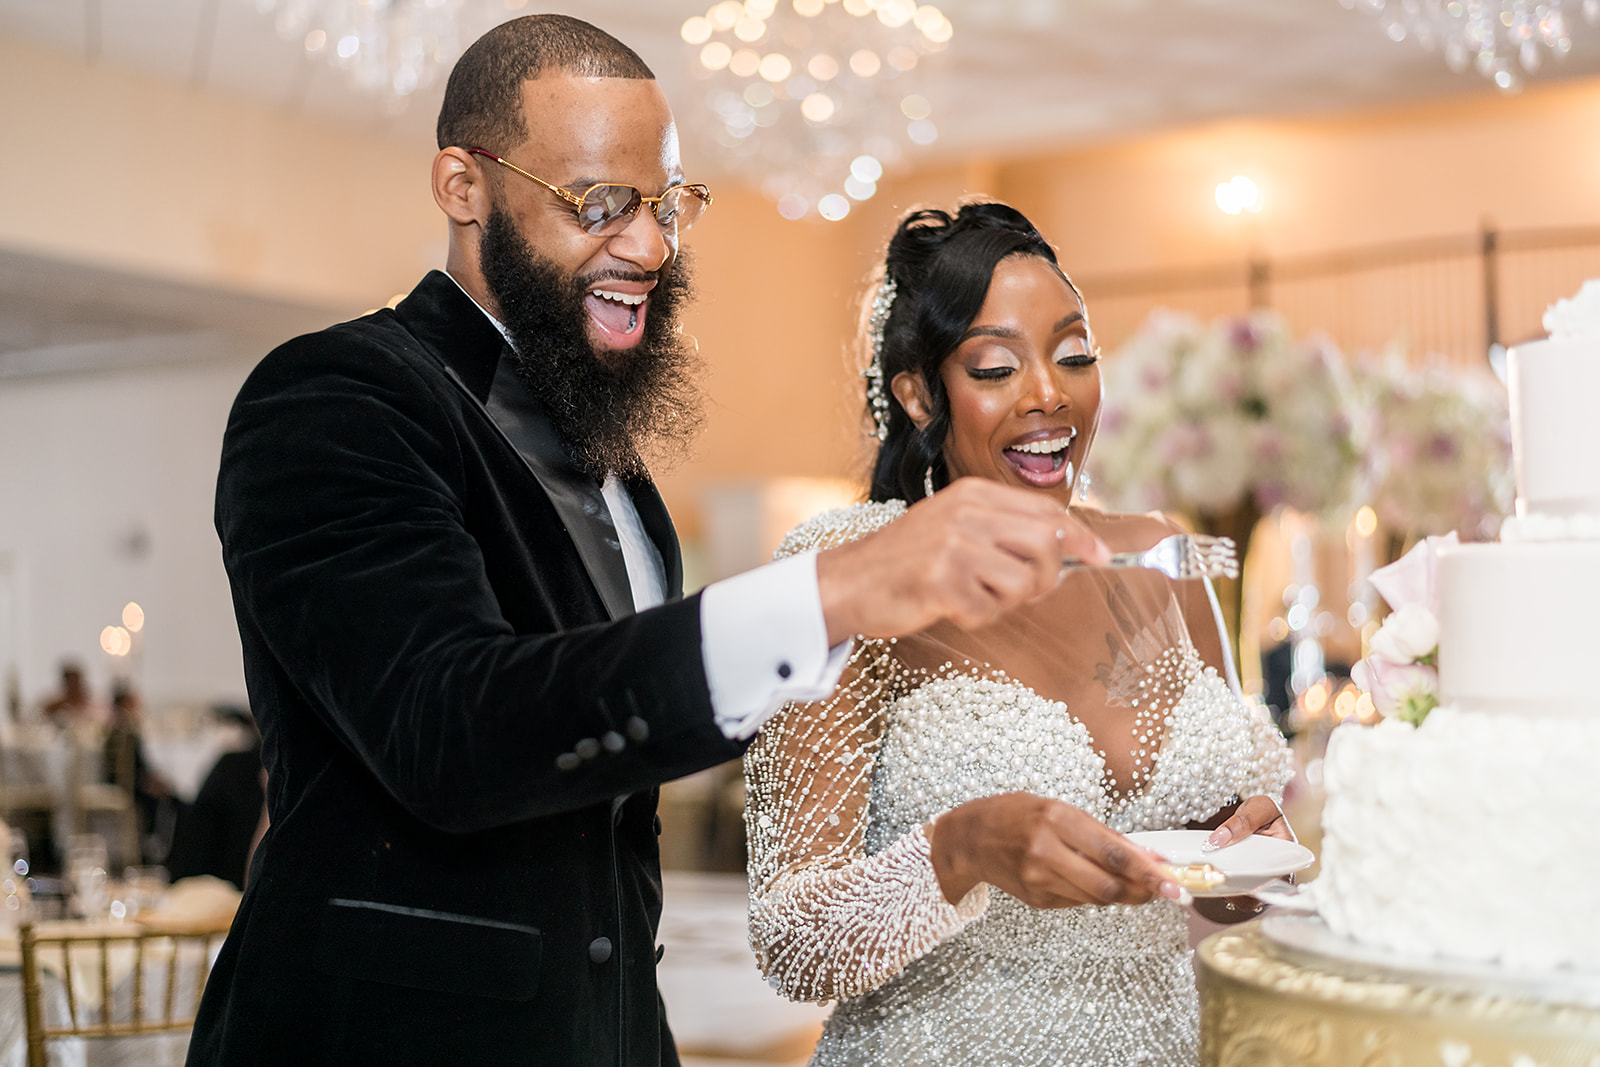 Cutting the wedding cake at the reception at Ashton Gardens Atlanta with JGraced Photography